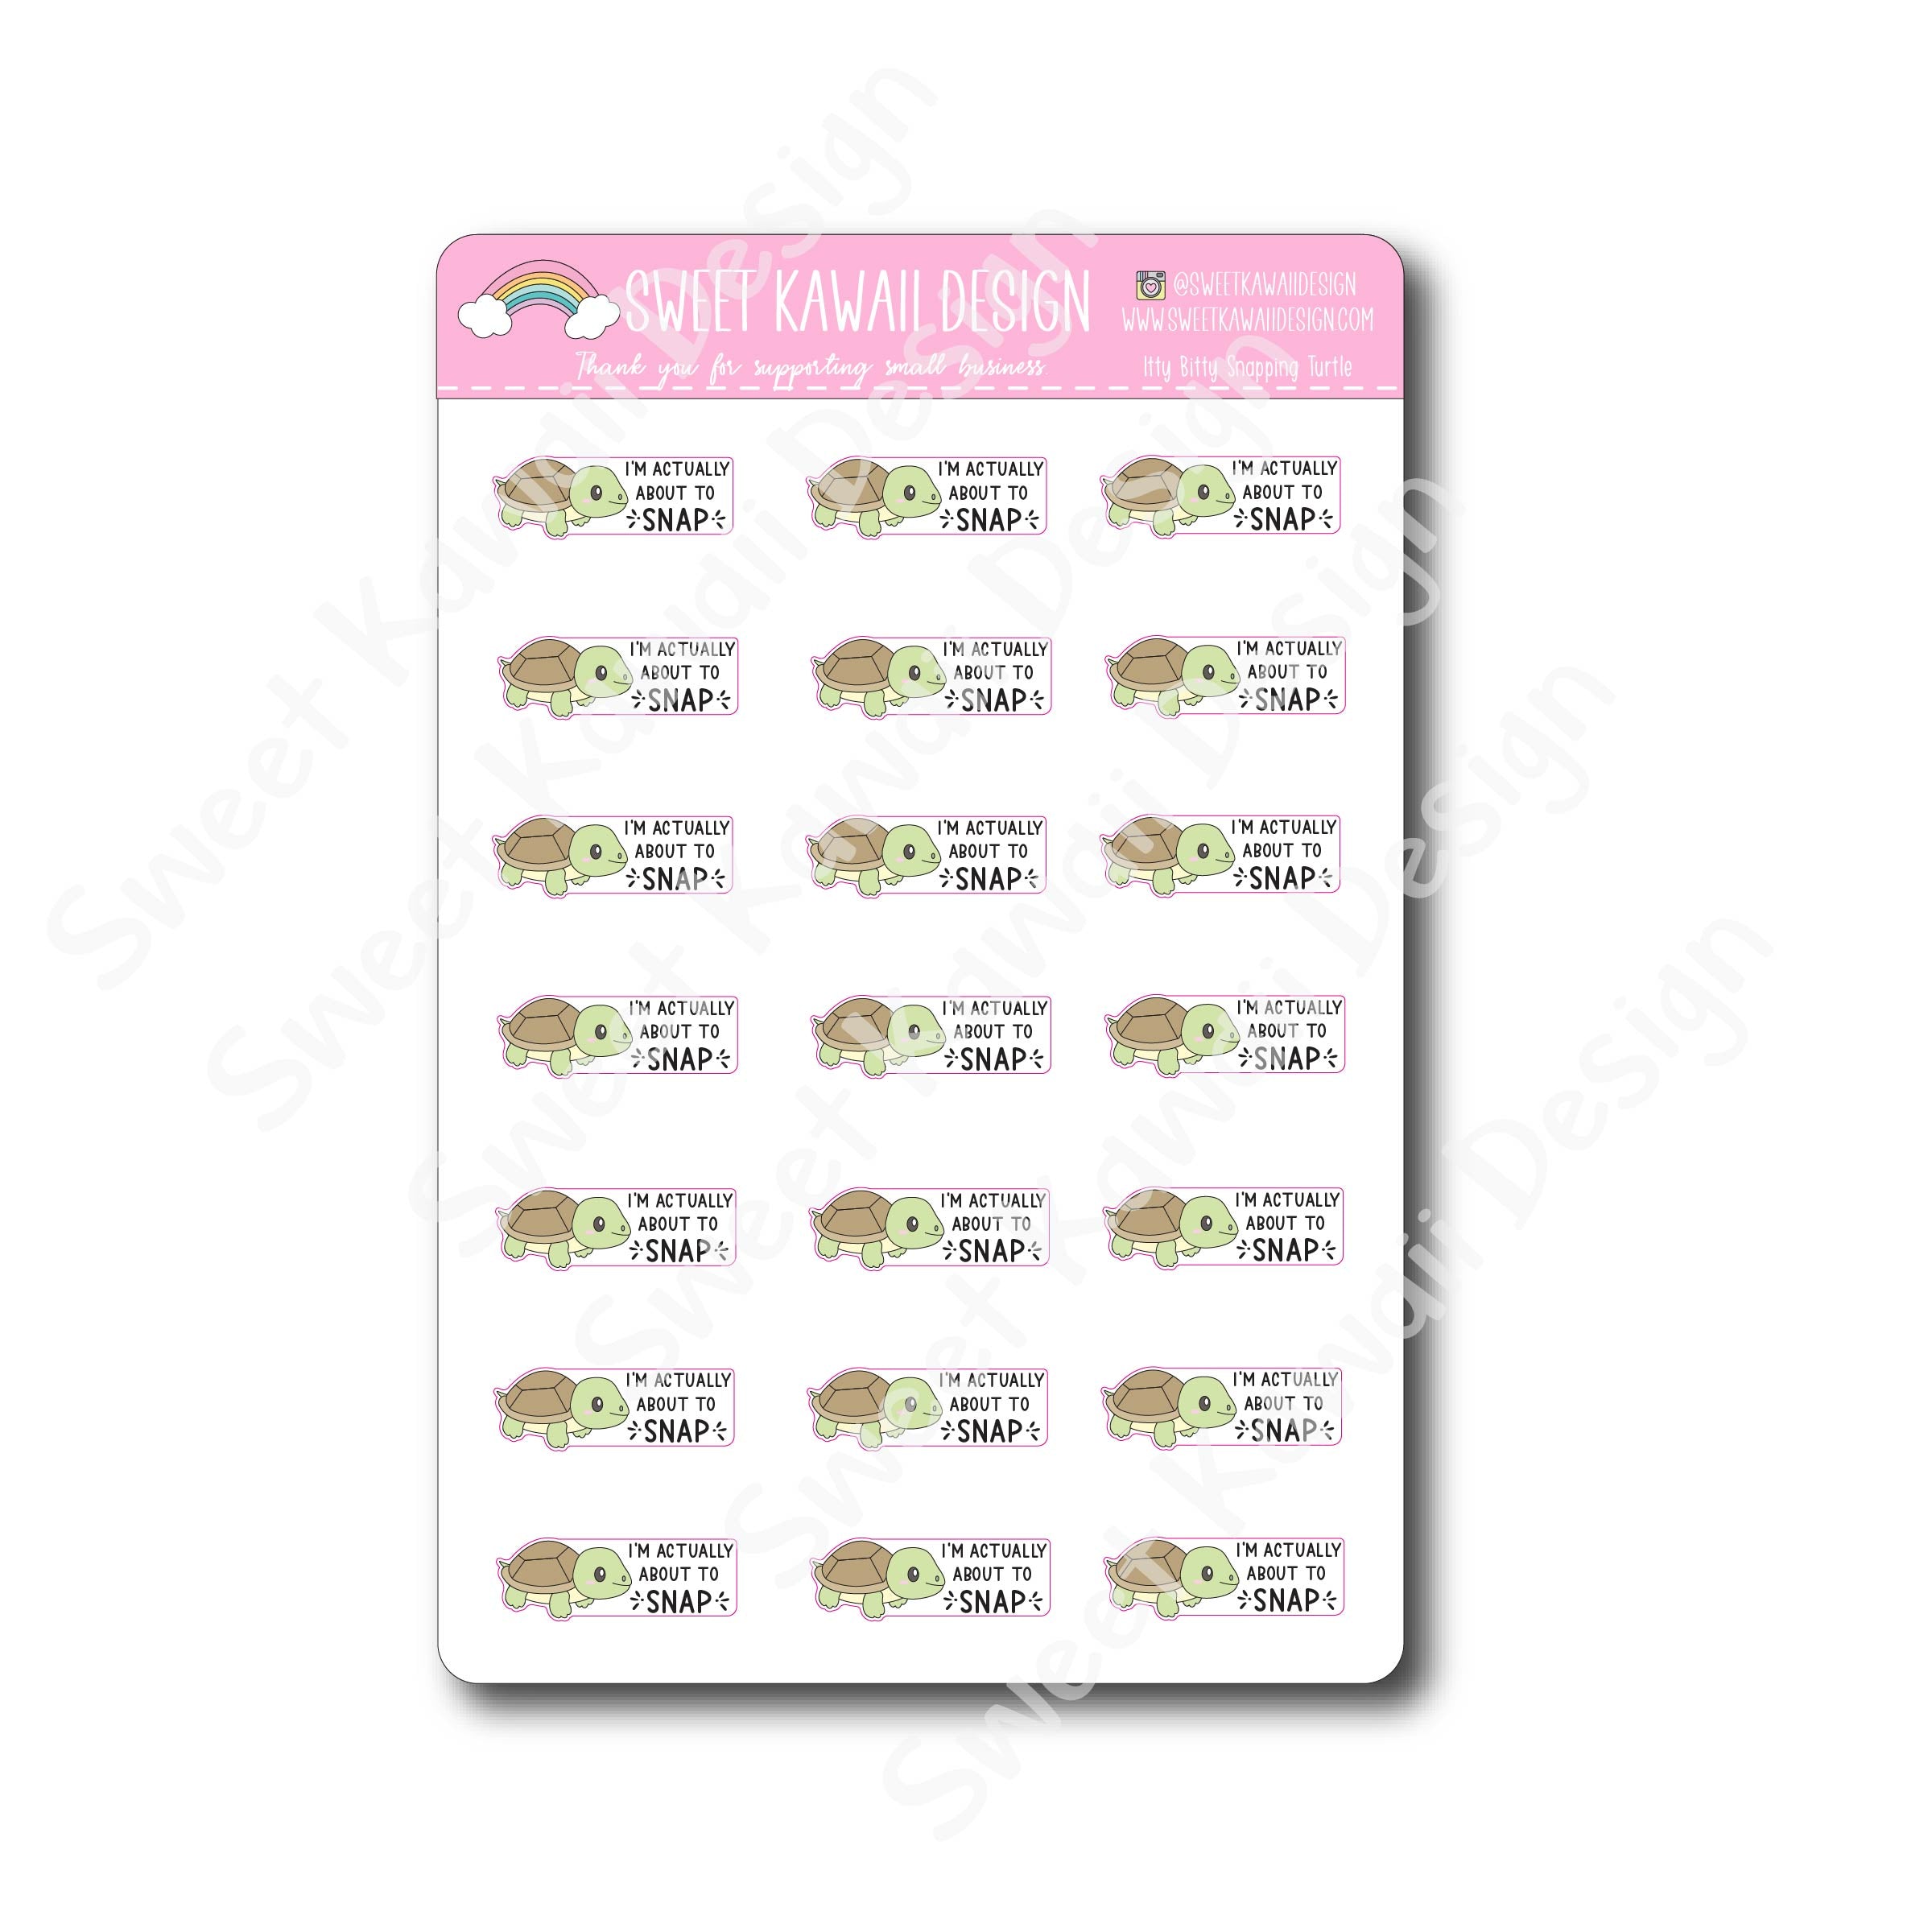 Kawaii Snapping Turtle Stickers